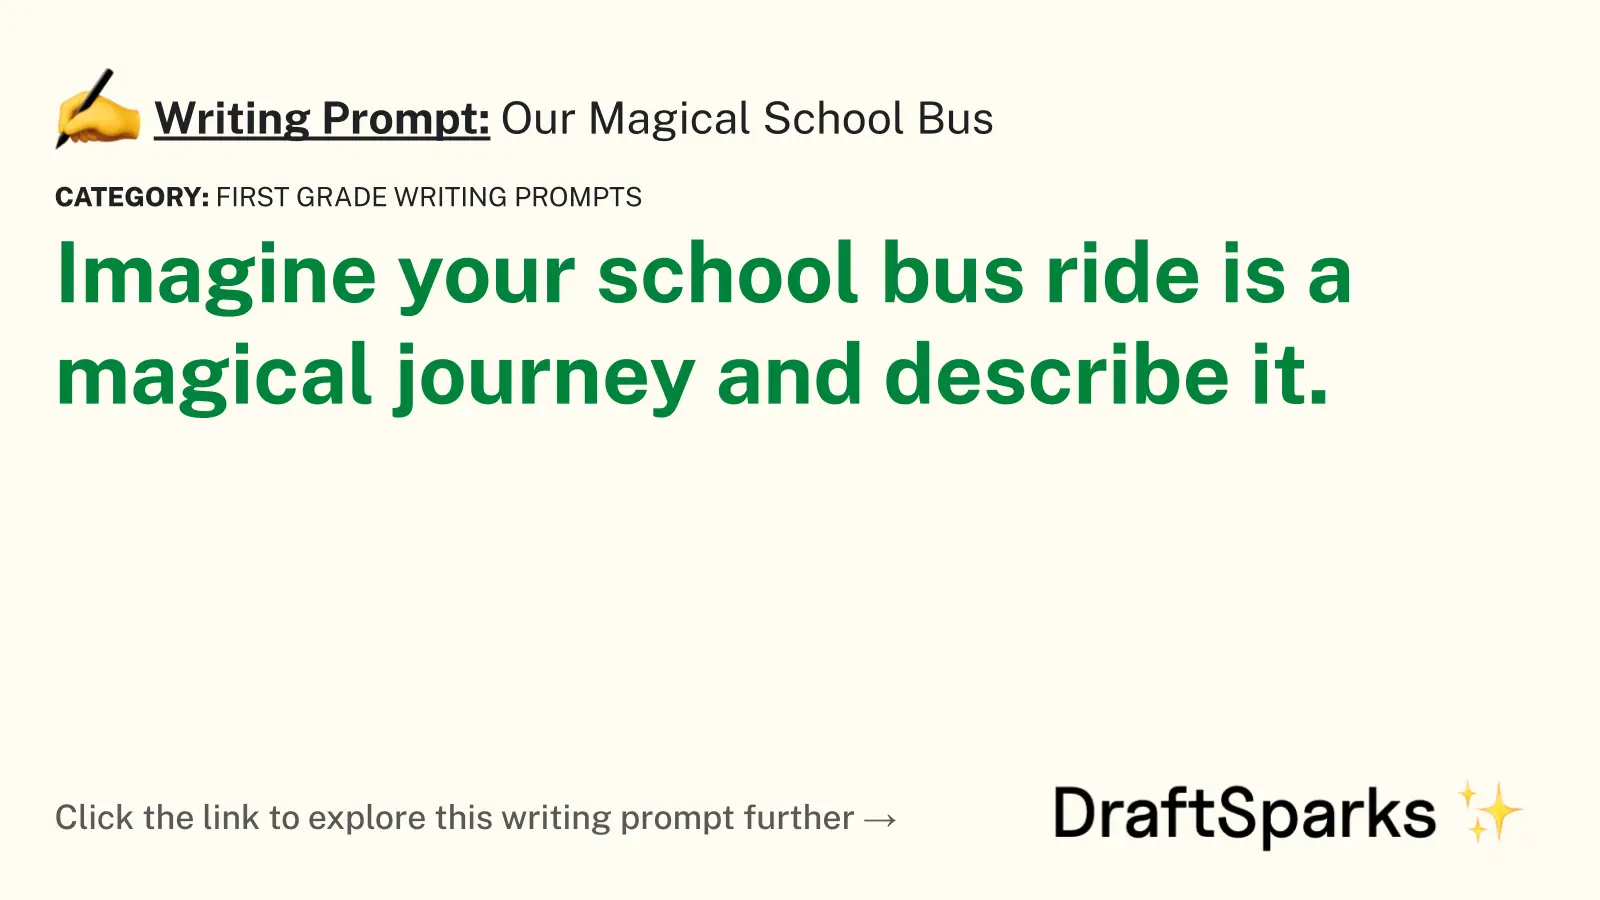 Our Magical School Bus